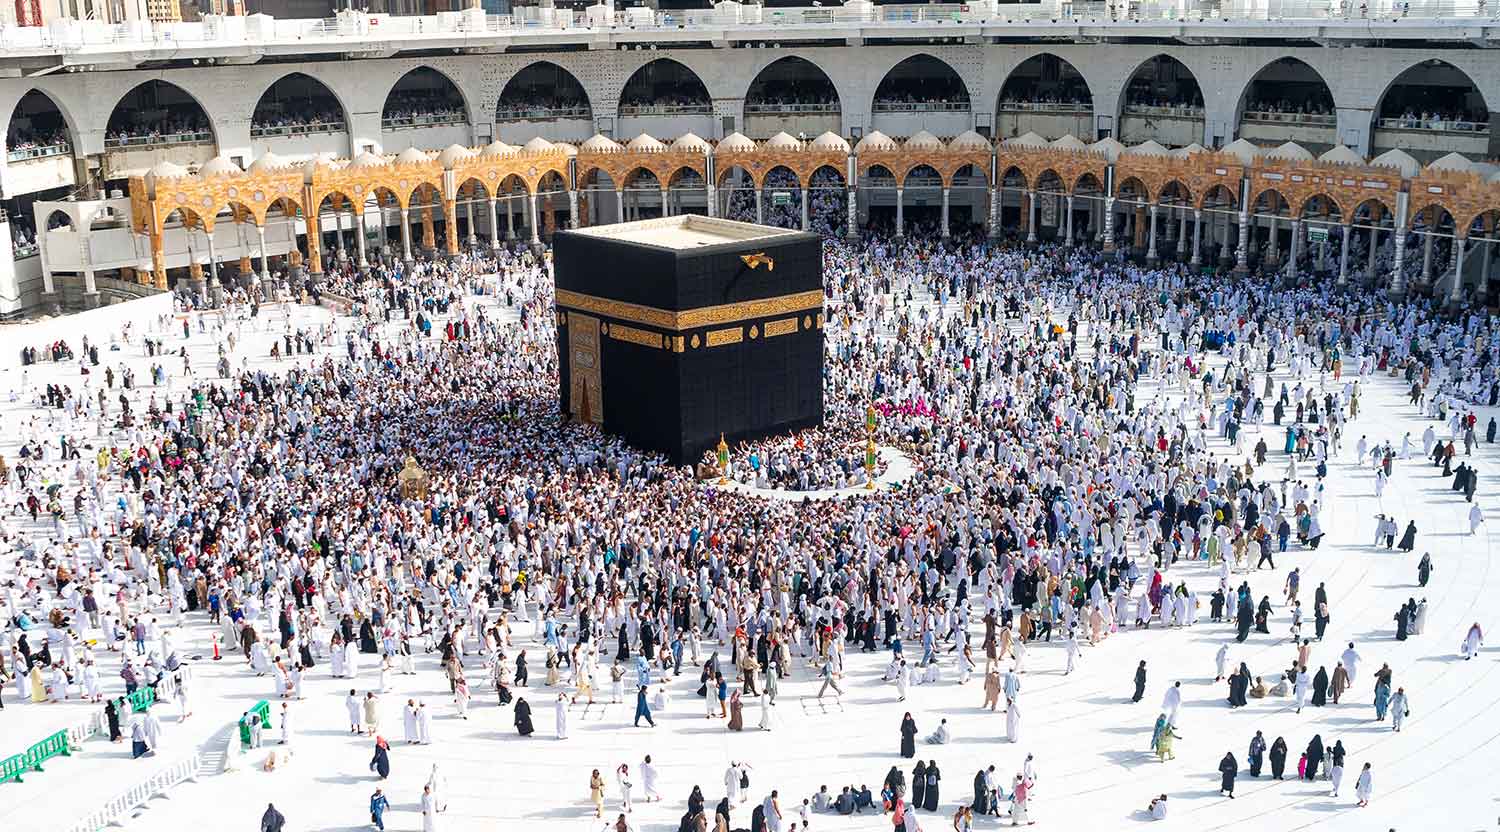 People walking around Holy Kaaba seven circles in Grand Mosque of Makkah (Image source: Shutterstock)